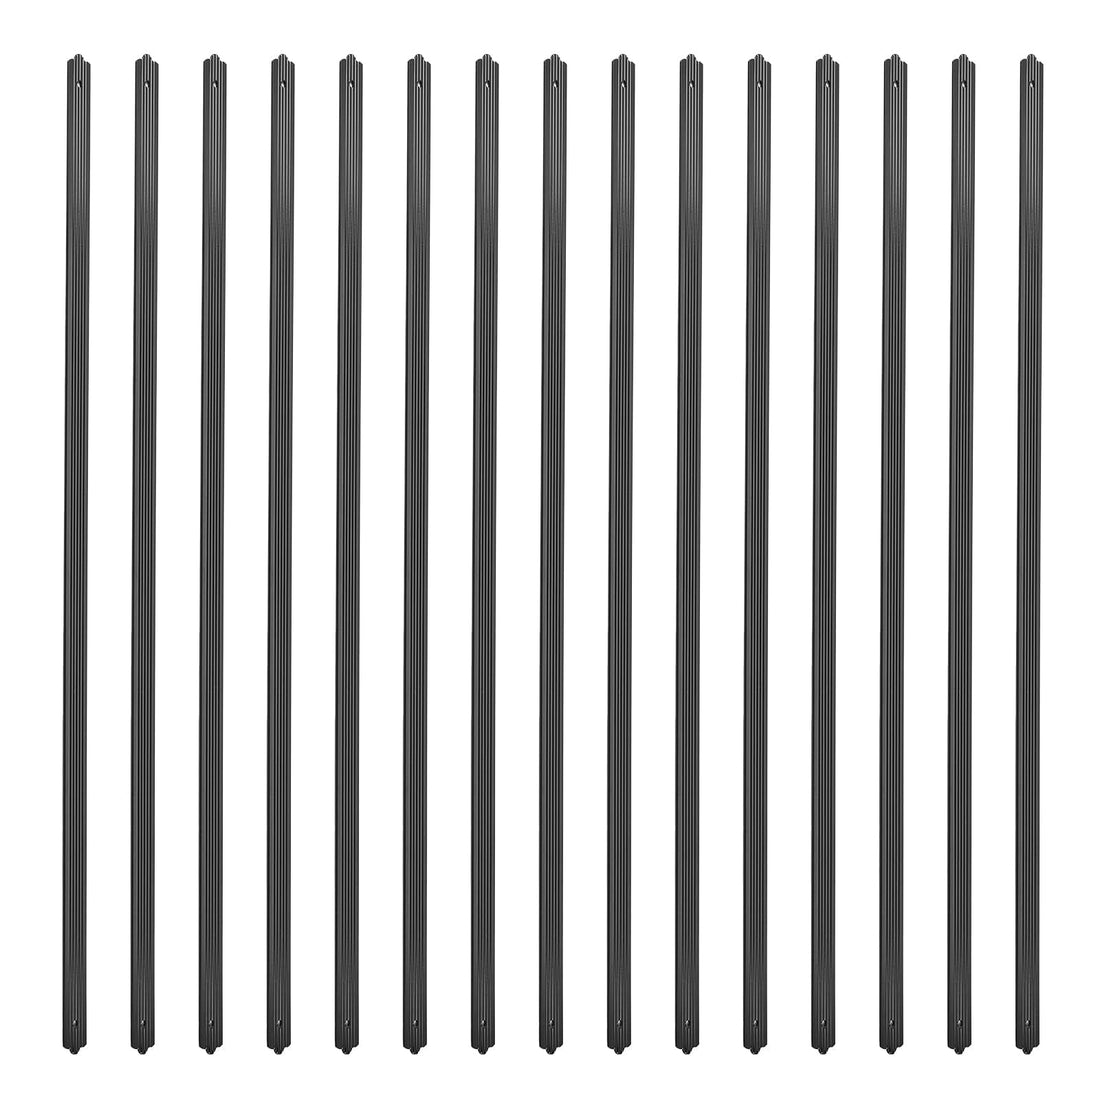 Aluminum Deck Balusters 32.25 x 1 Inch Flat Straight Grooved Porch Railing Matte Black